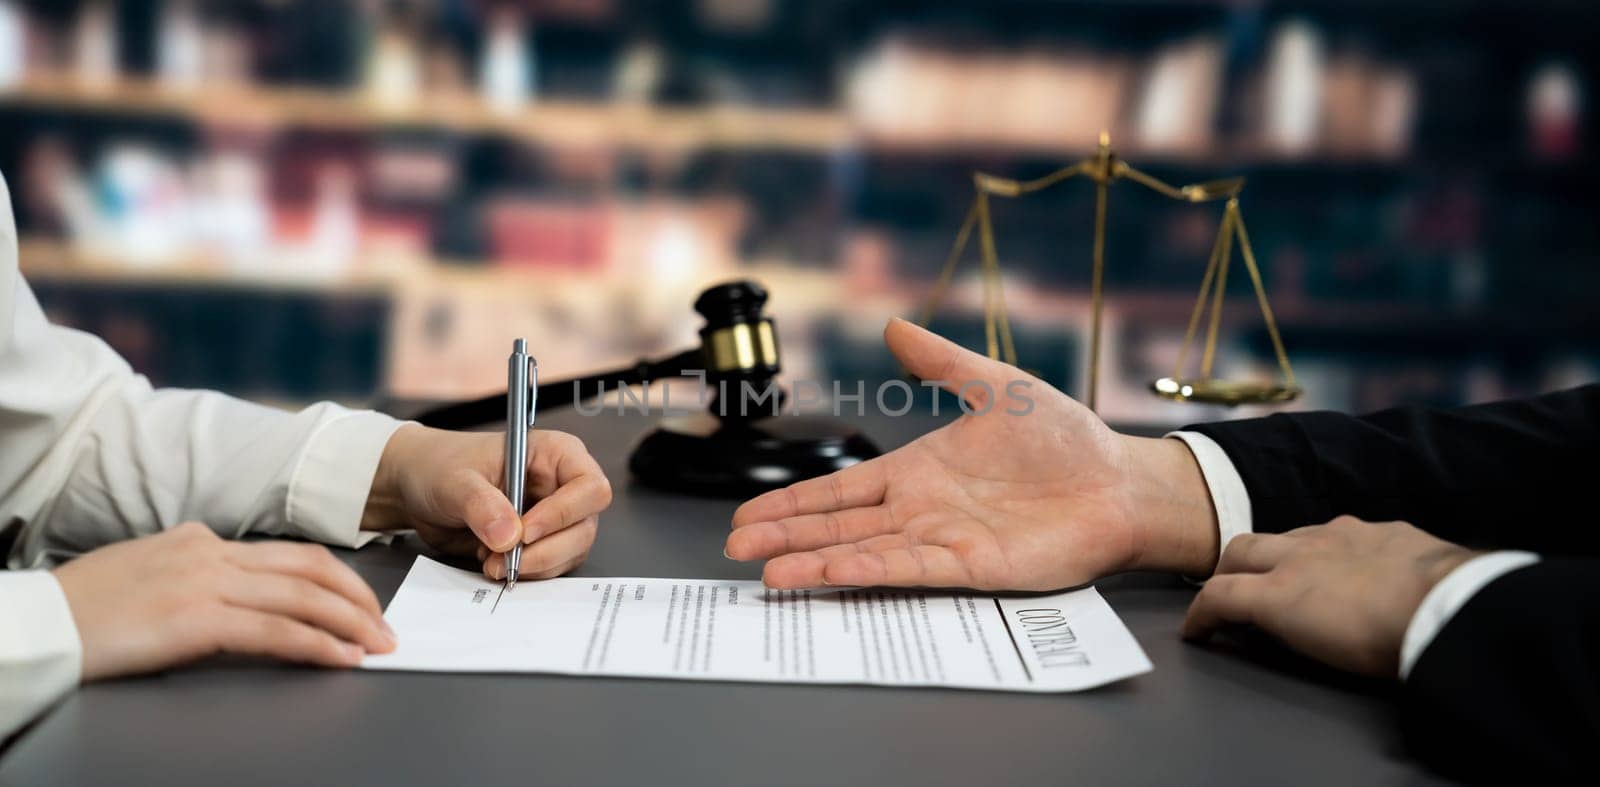 Lawyer signing contract, professional lawyer in law firm library drafting legal document or contract agreement ensuring lawful protection for client's dispute as fairness advocate concept. Equilibrium